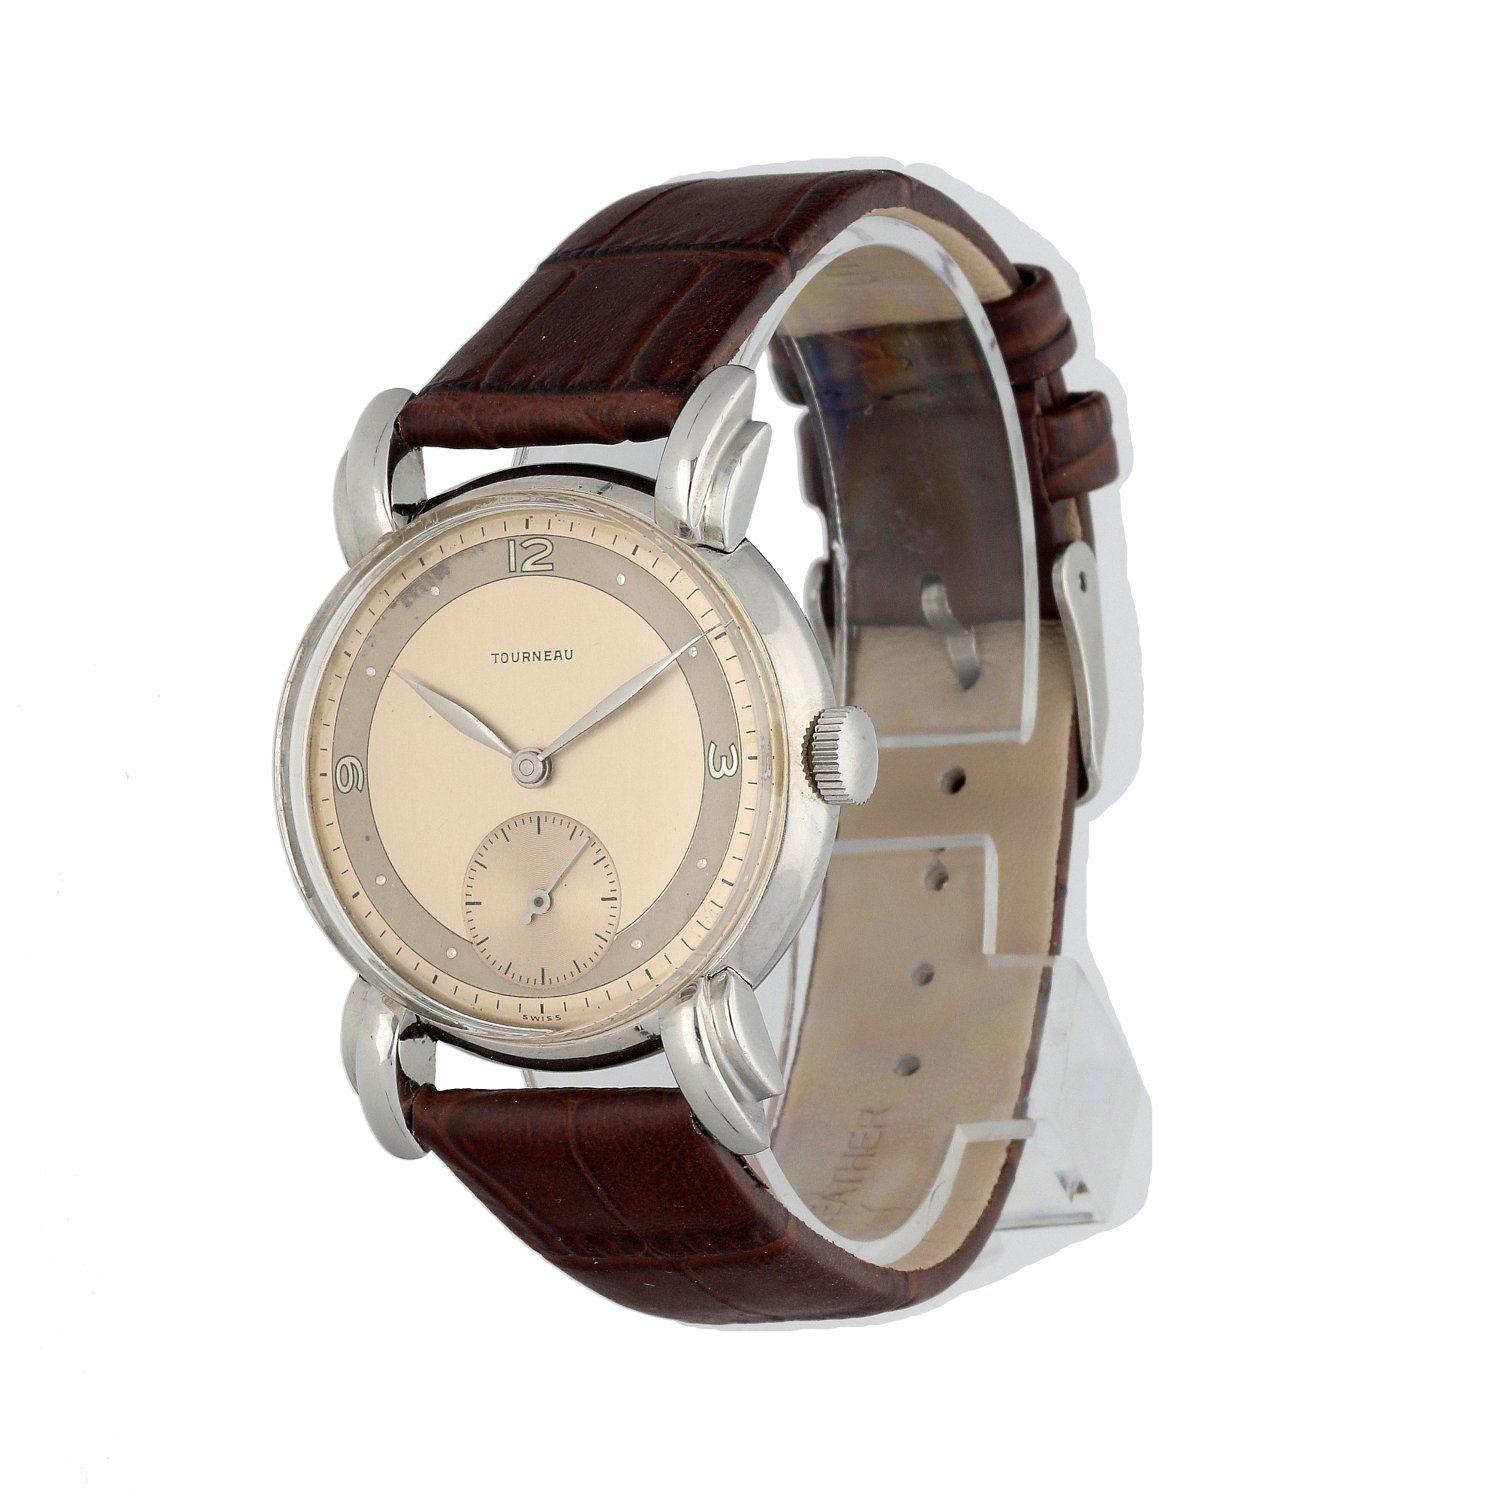 Tourneau men's watch. 34MM stainless steel case. Light Bronze dial with Arabic numeral hour marker. Minute markers on the outer dial and small second display at 6 o'clock position. Acrylic crystal and stainless steel case back. Brown leather with